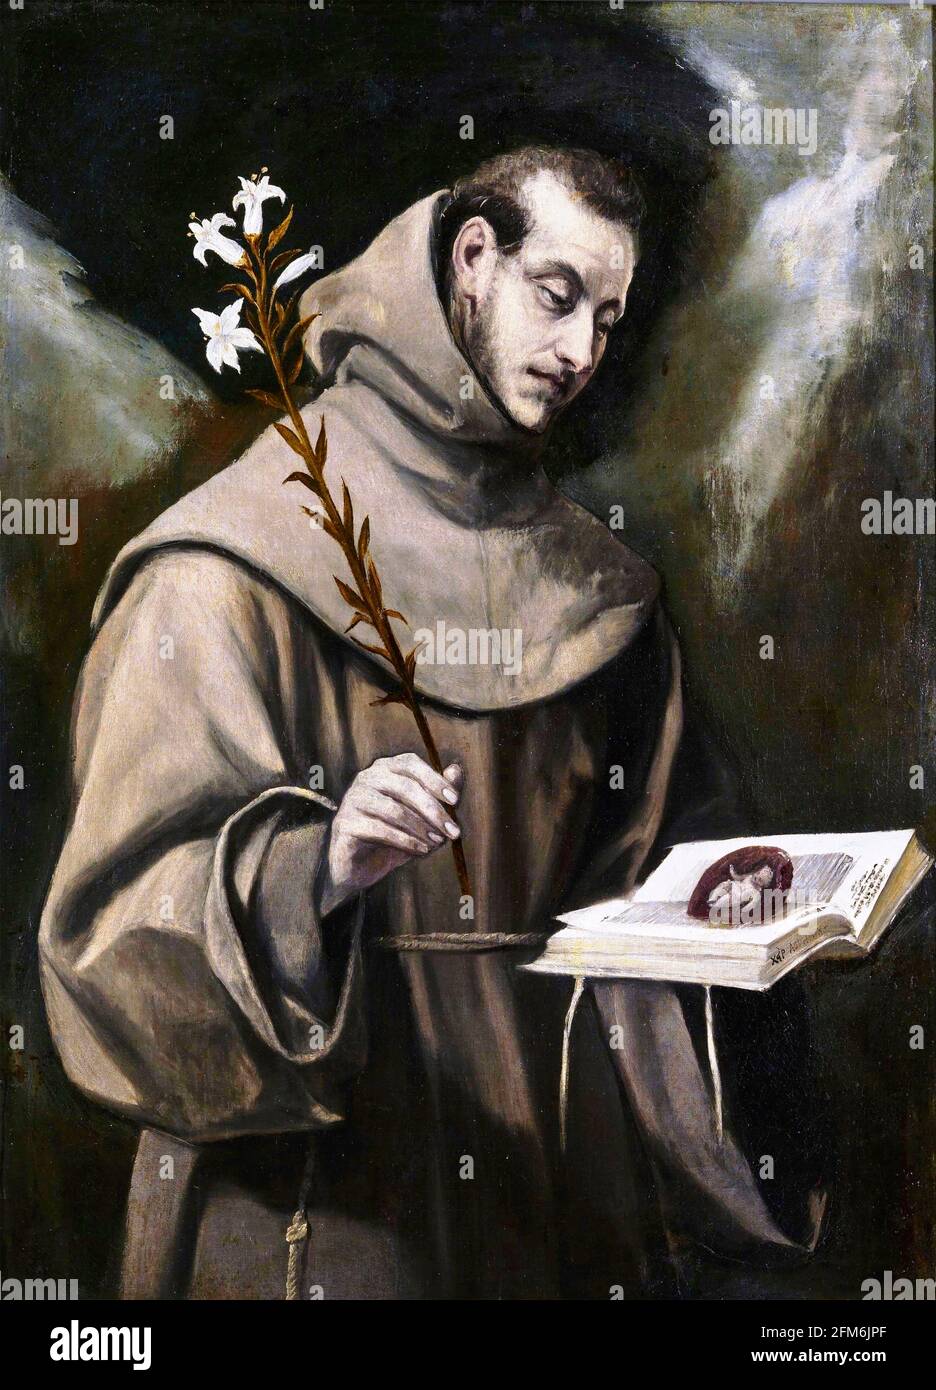 Saint Anthony of Padua by El Greco (1541-1614), oil on canvas, c. 1580 Stock Photo